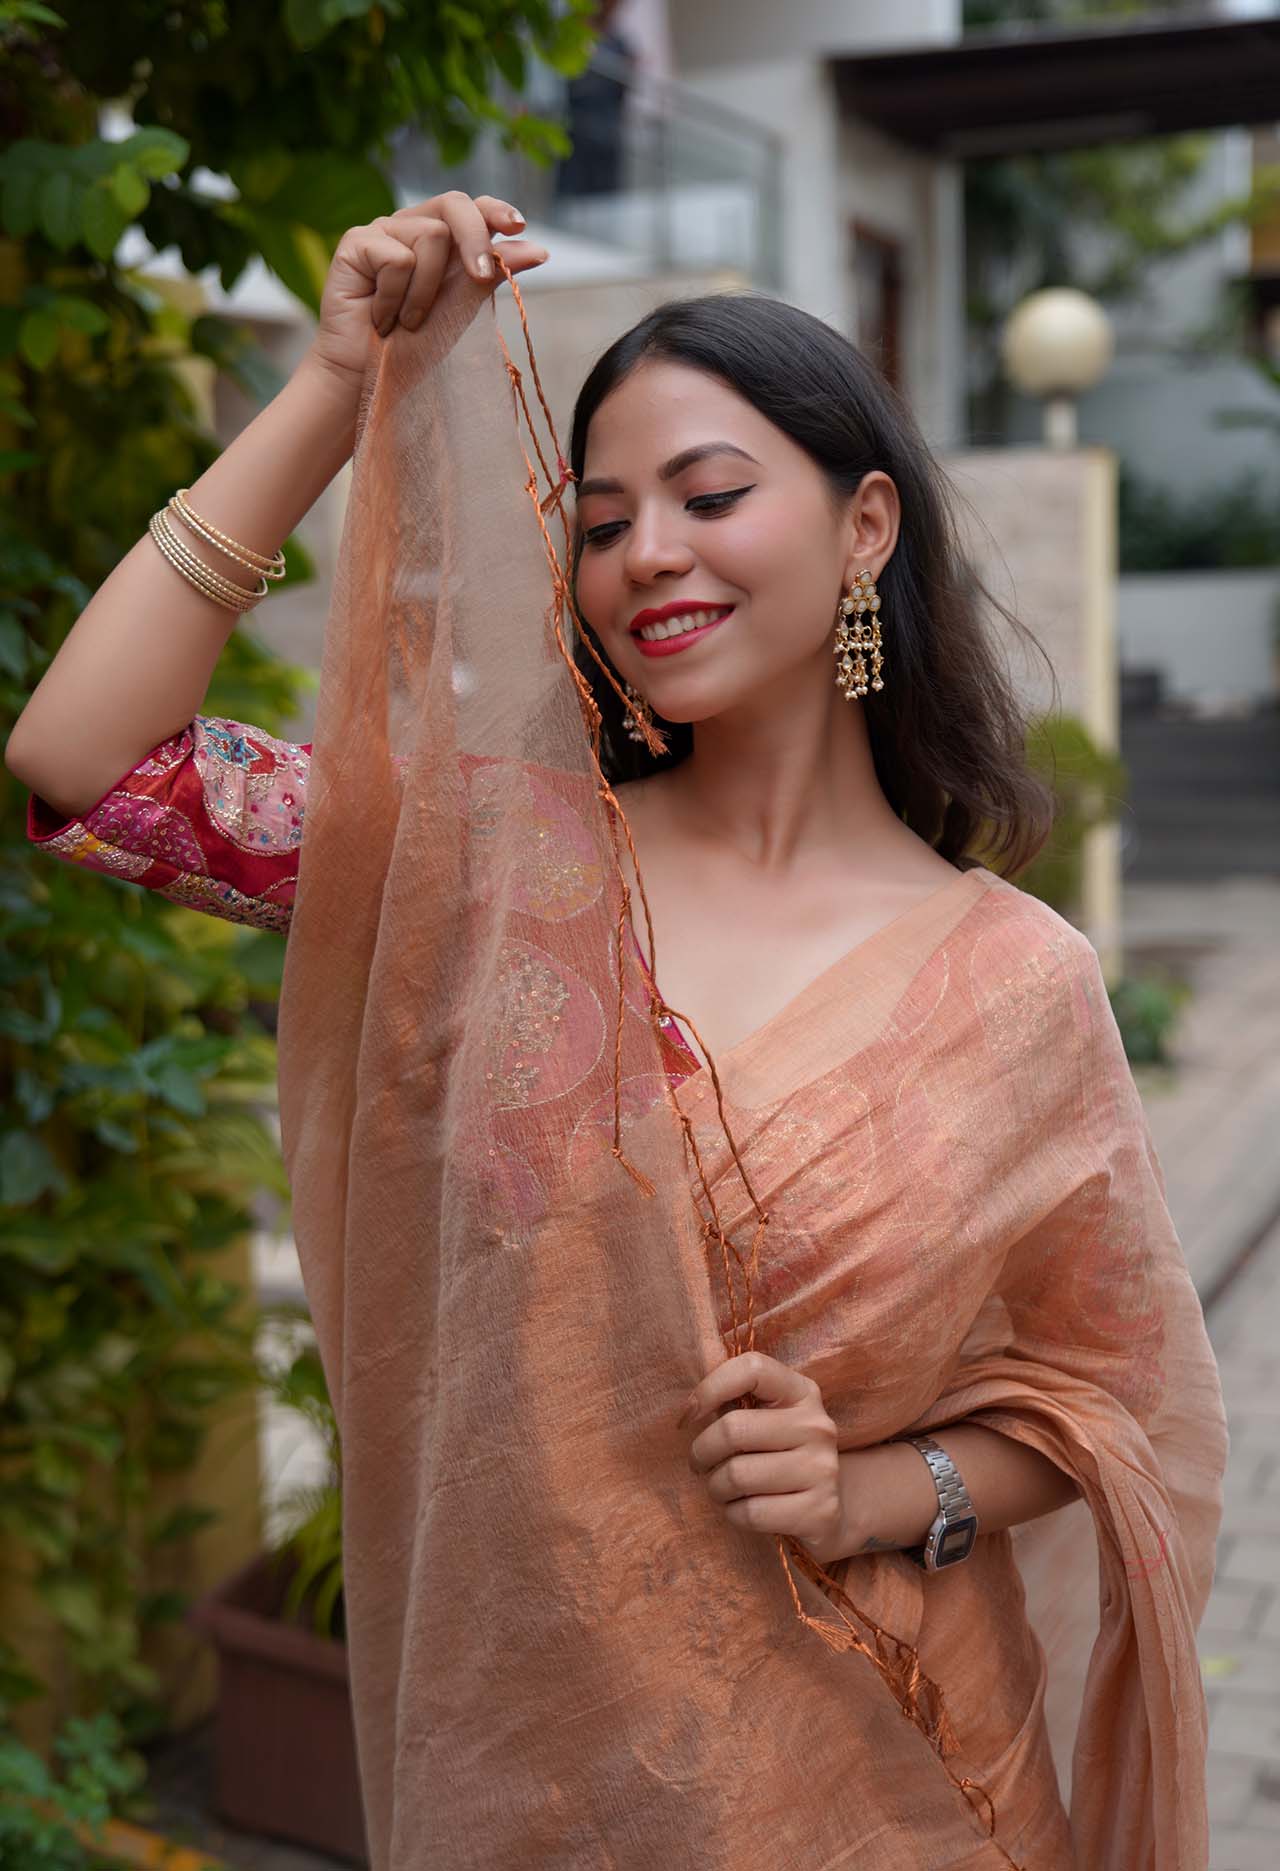 Golden Dhoop Chaav Metallic Tissue  With Tassels on Pallu Wrap In One Minute saree